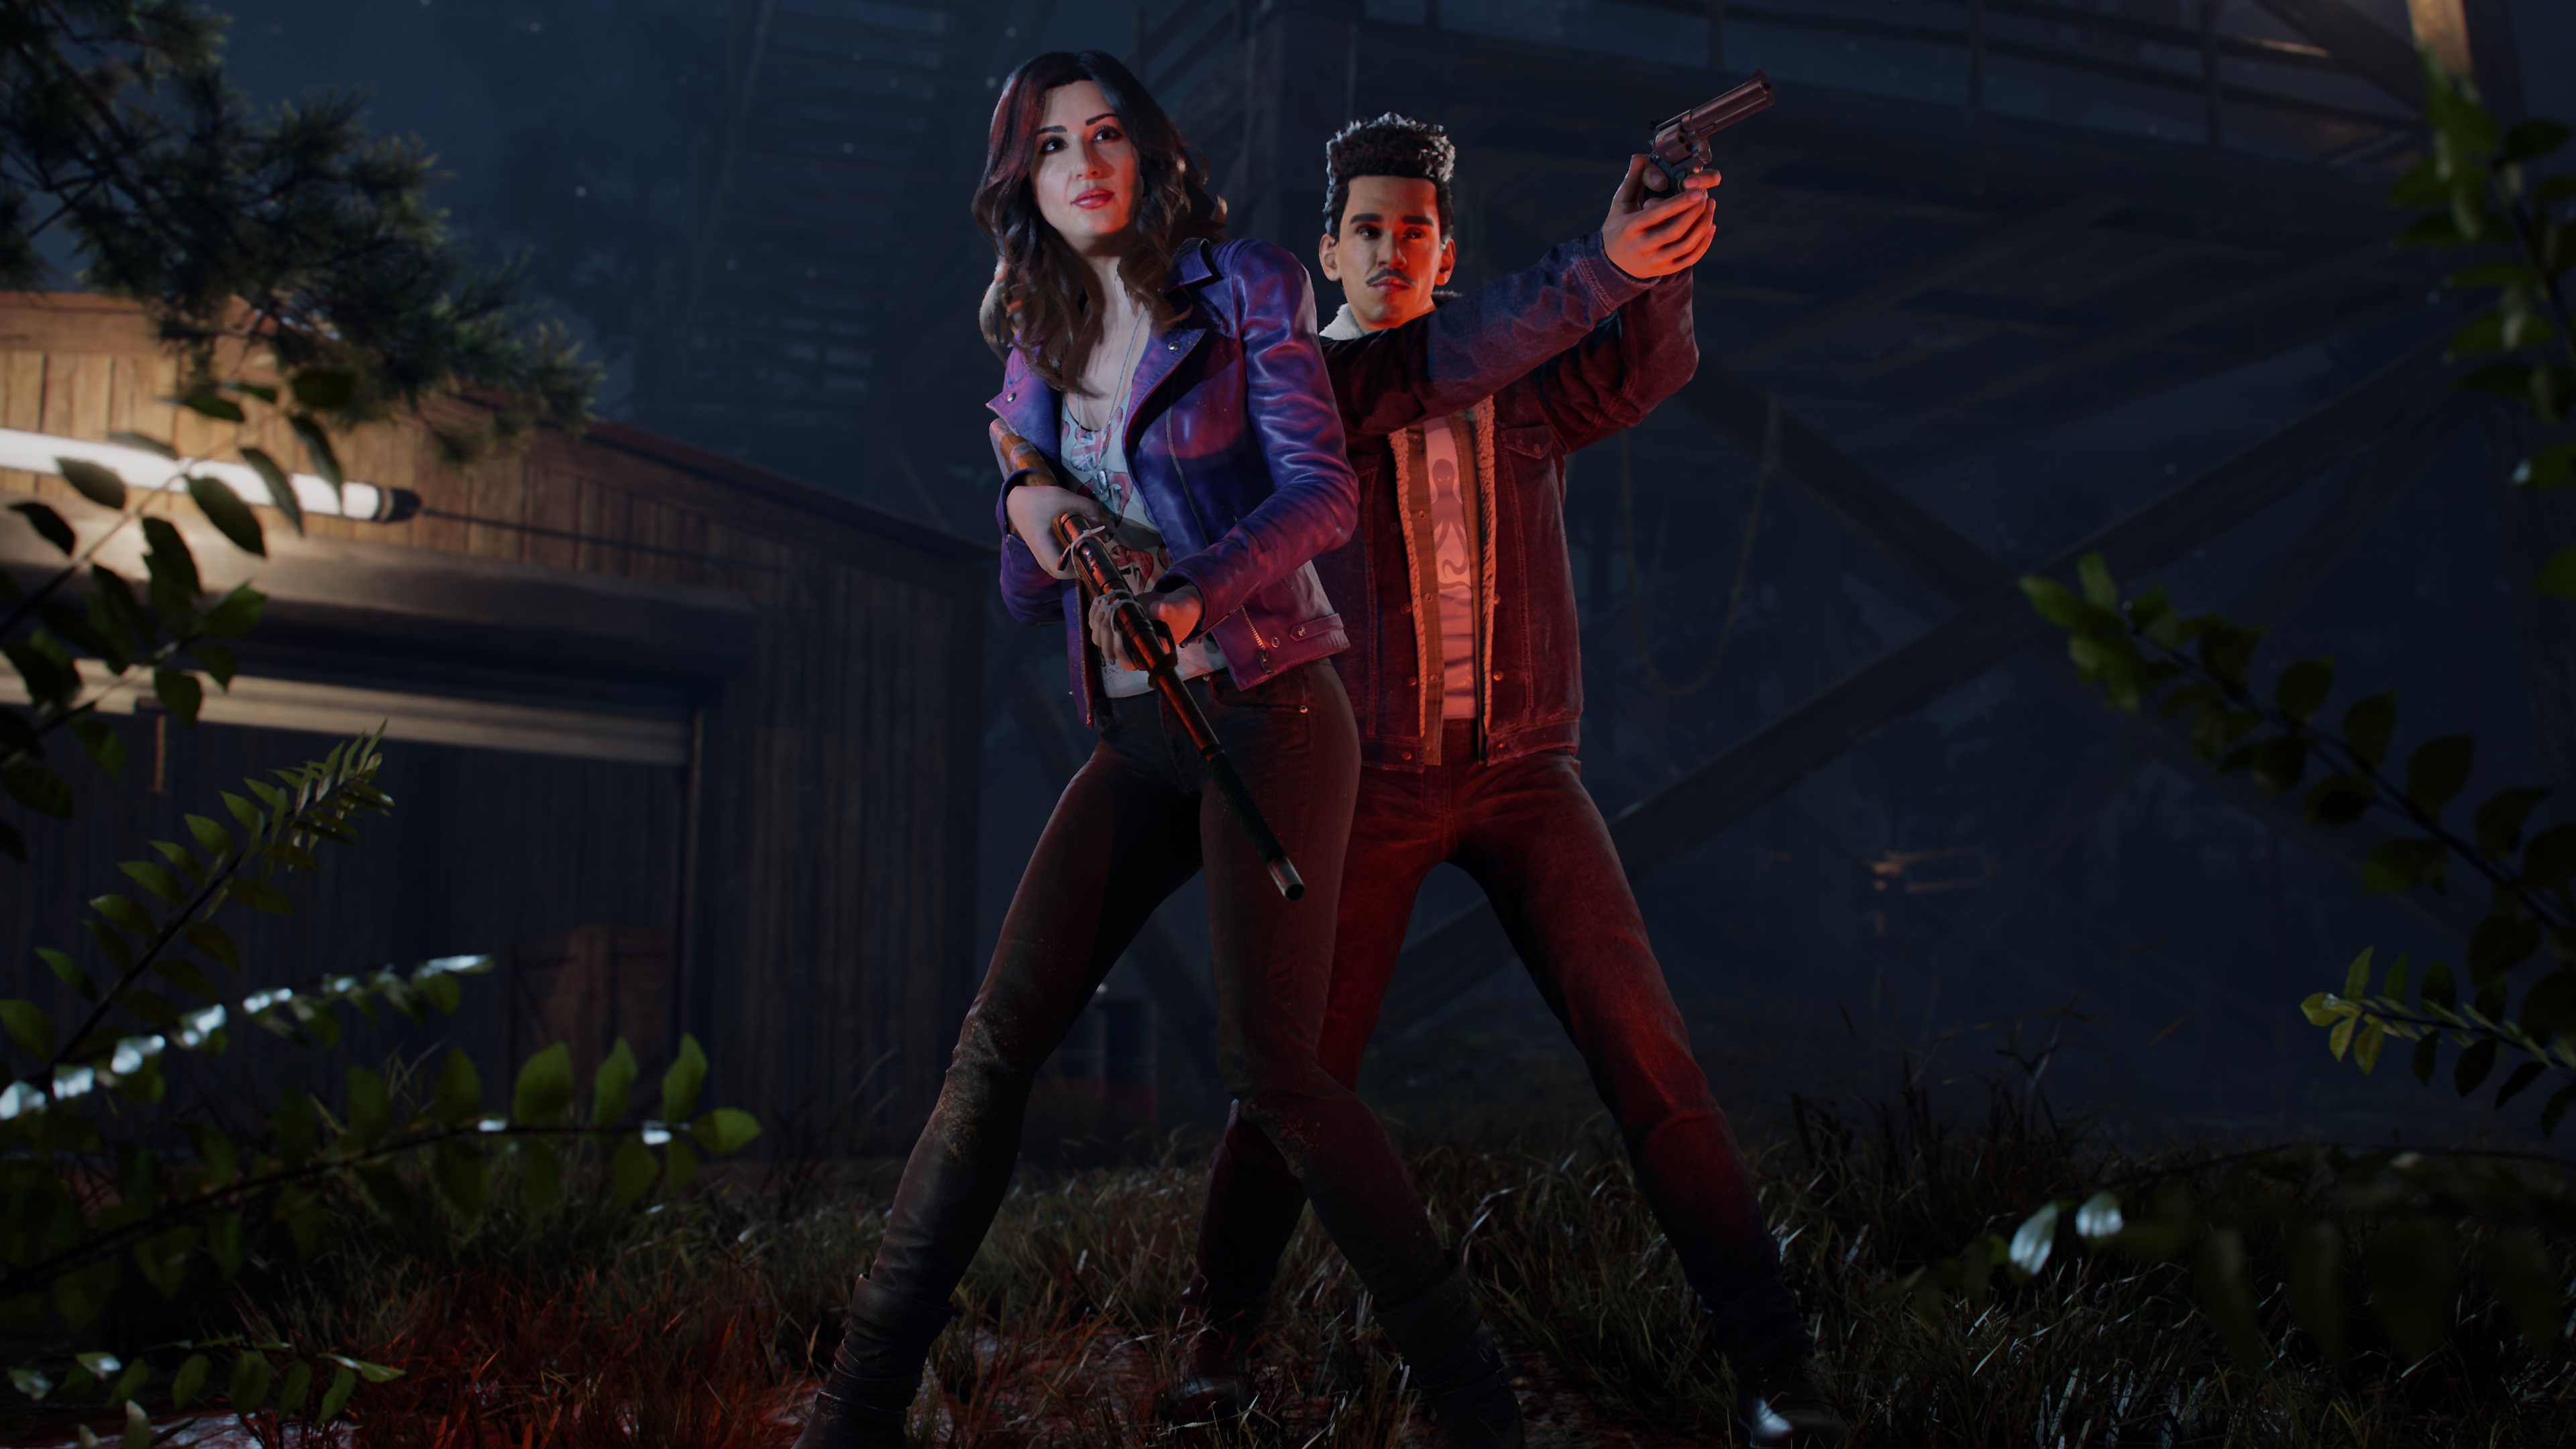 Evil Dead: The Game screenshot featuring two characters standing ready for battle